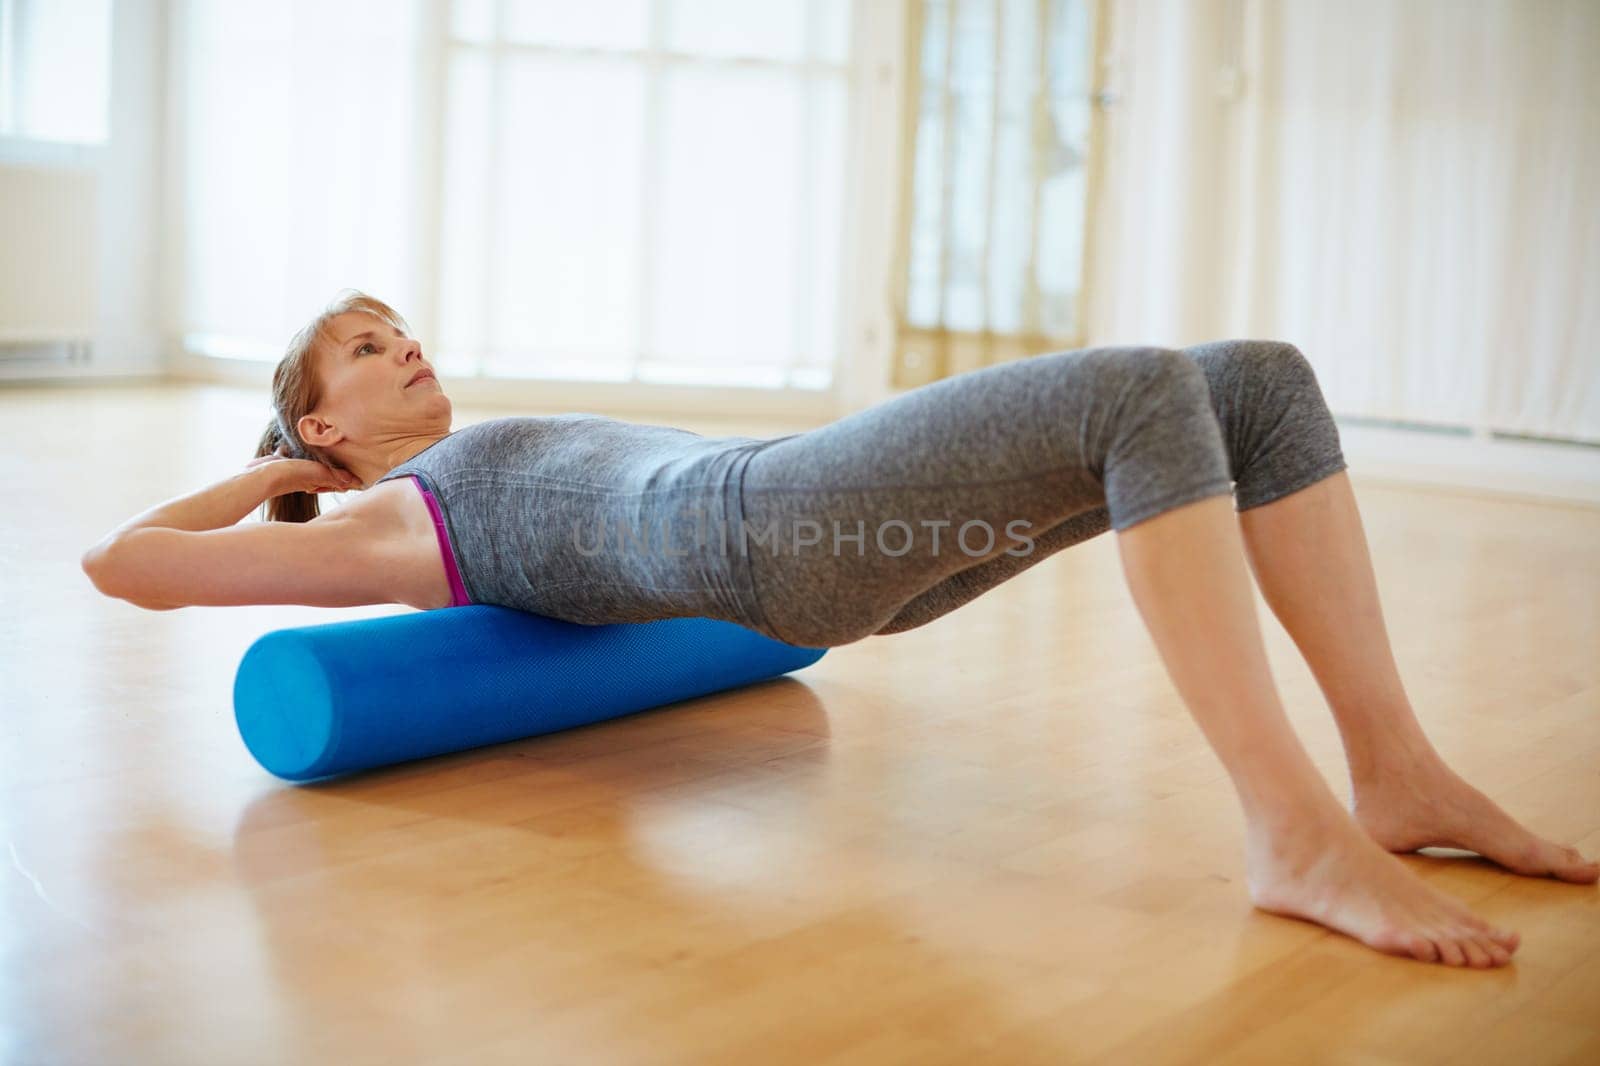 Yoga keeps her super flexible. a woman doing roller foam exercises during a yoga workout